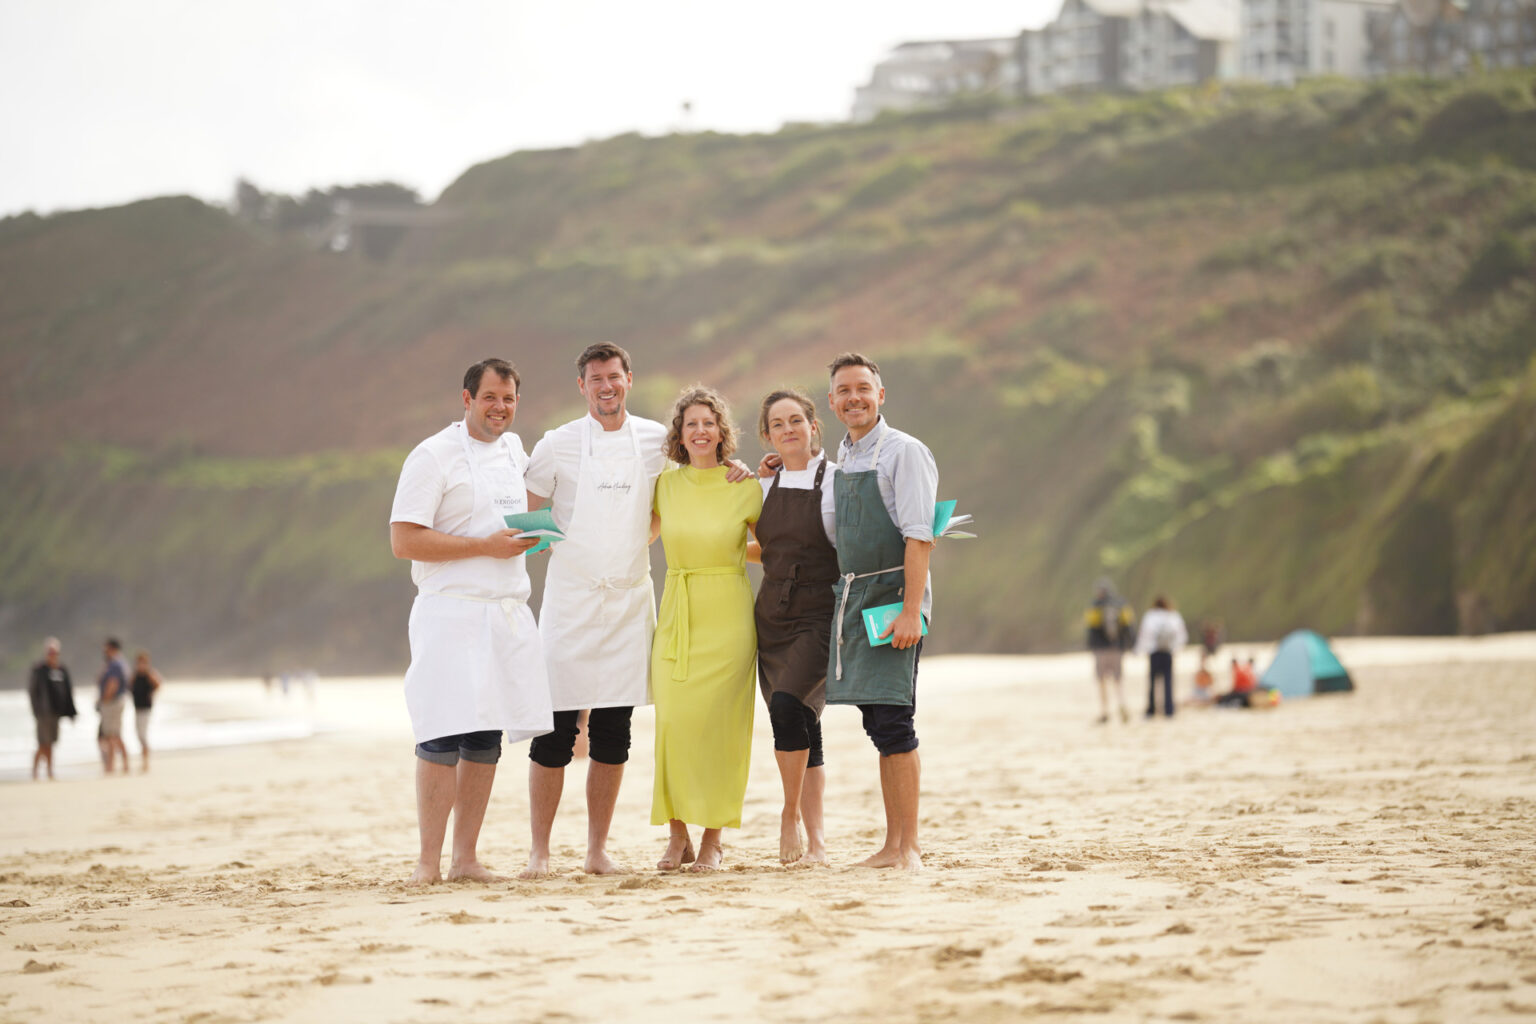 Guy Owen, Adam Handling, Harriet Mansell and Mike Smith with Trencherman's Guide editor Abi Manning on Portminster beach